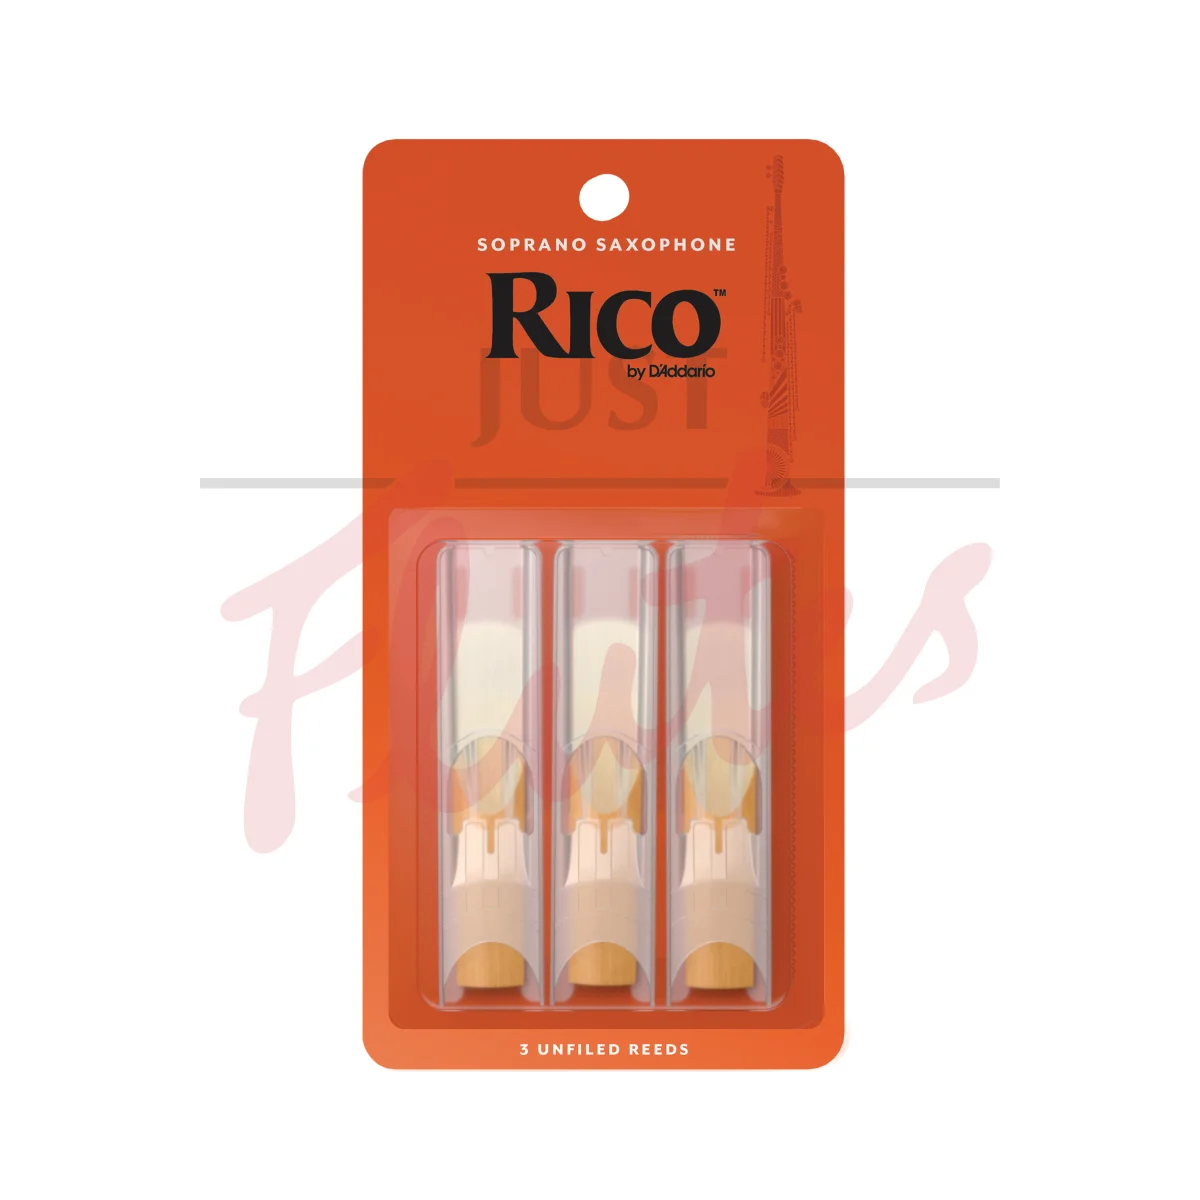 Rico by D'Addario RIA0315 Soprano Saxophone Reeds, Strength 1.5, Pack of 3